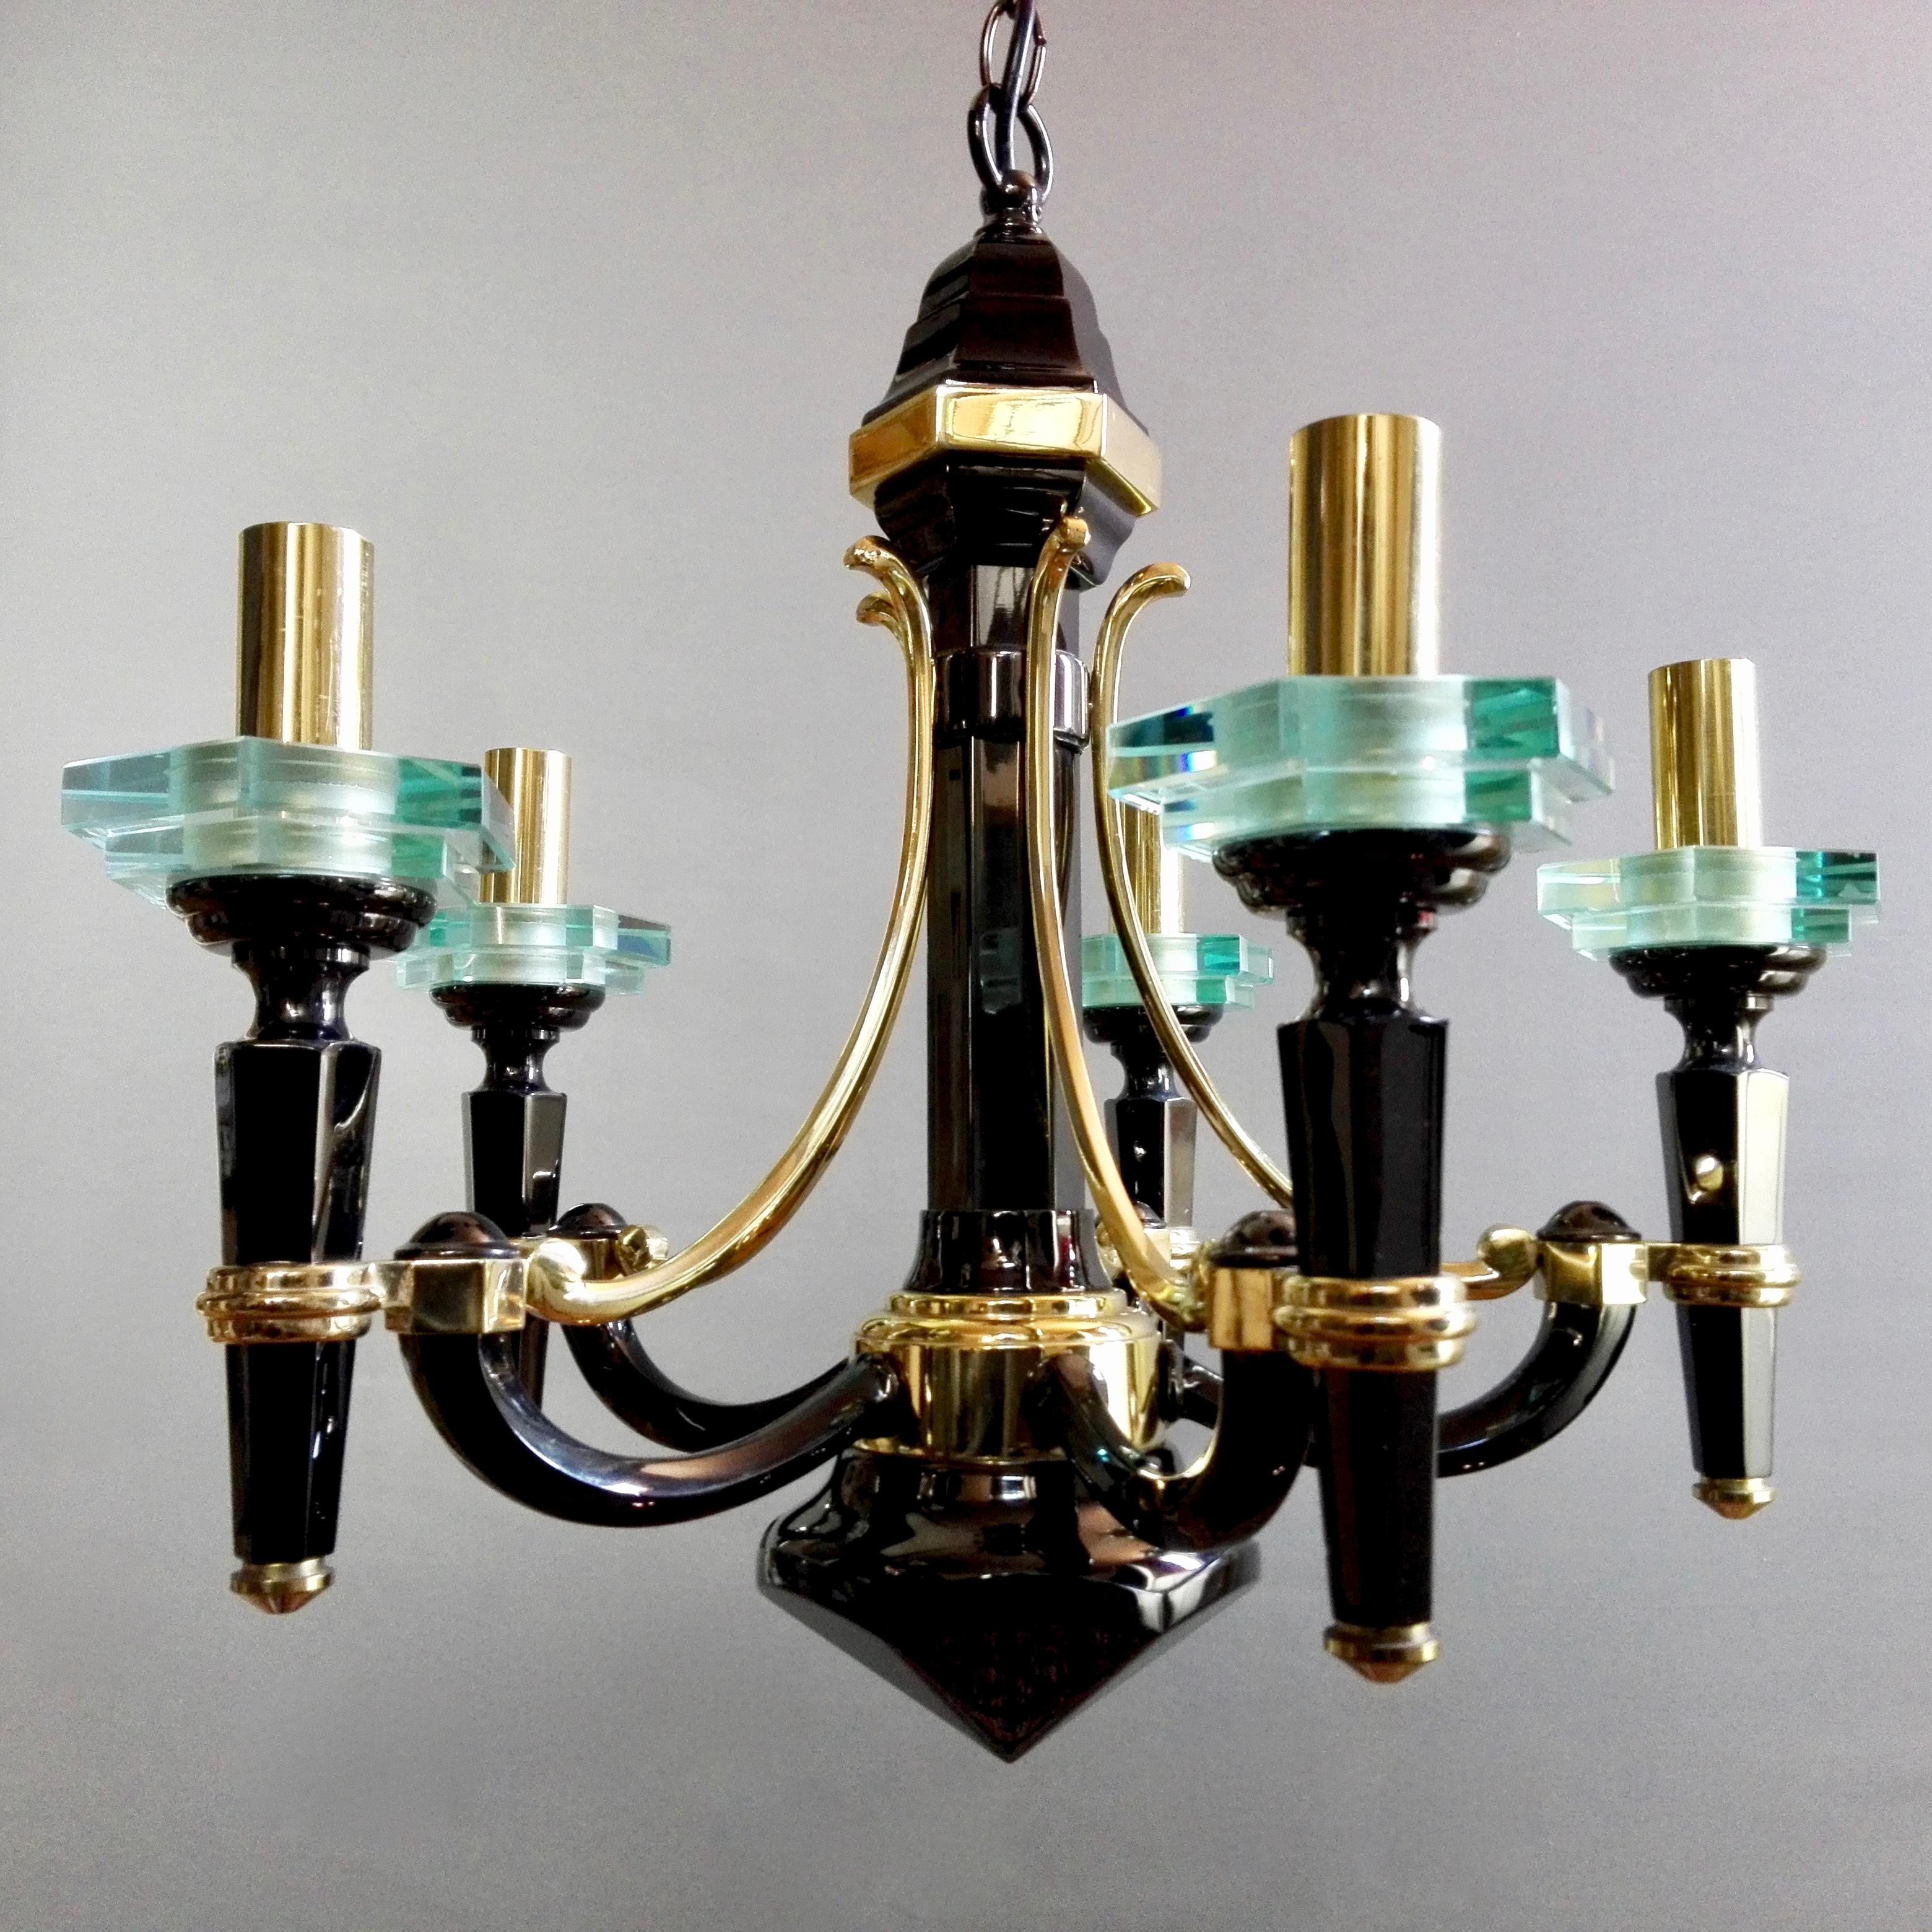 Lampart Milano attributable 70s Five-Light Chandelier, Solid Brass and Crystals. In Good Condition For Sale In Caprino Veronese, VR